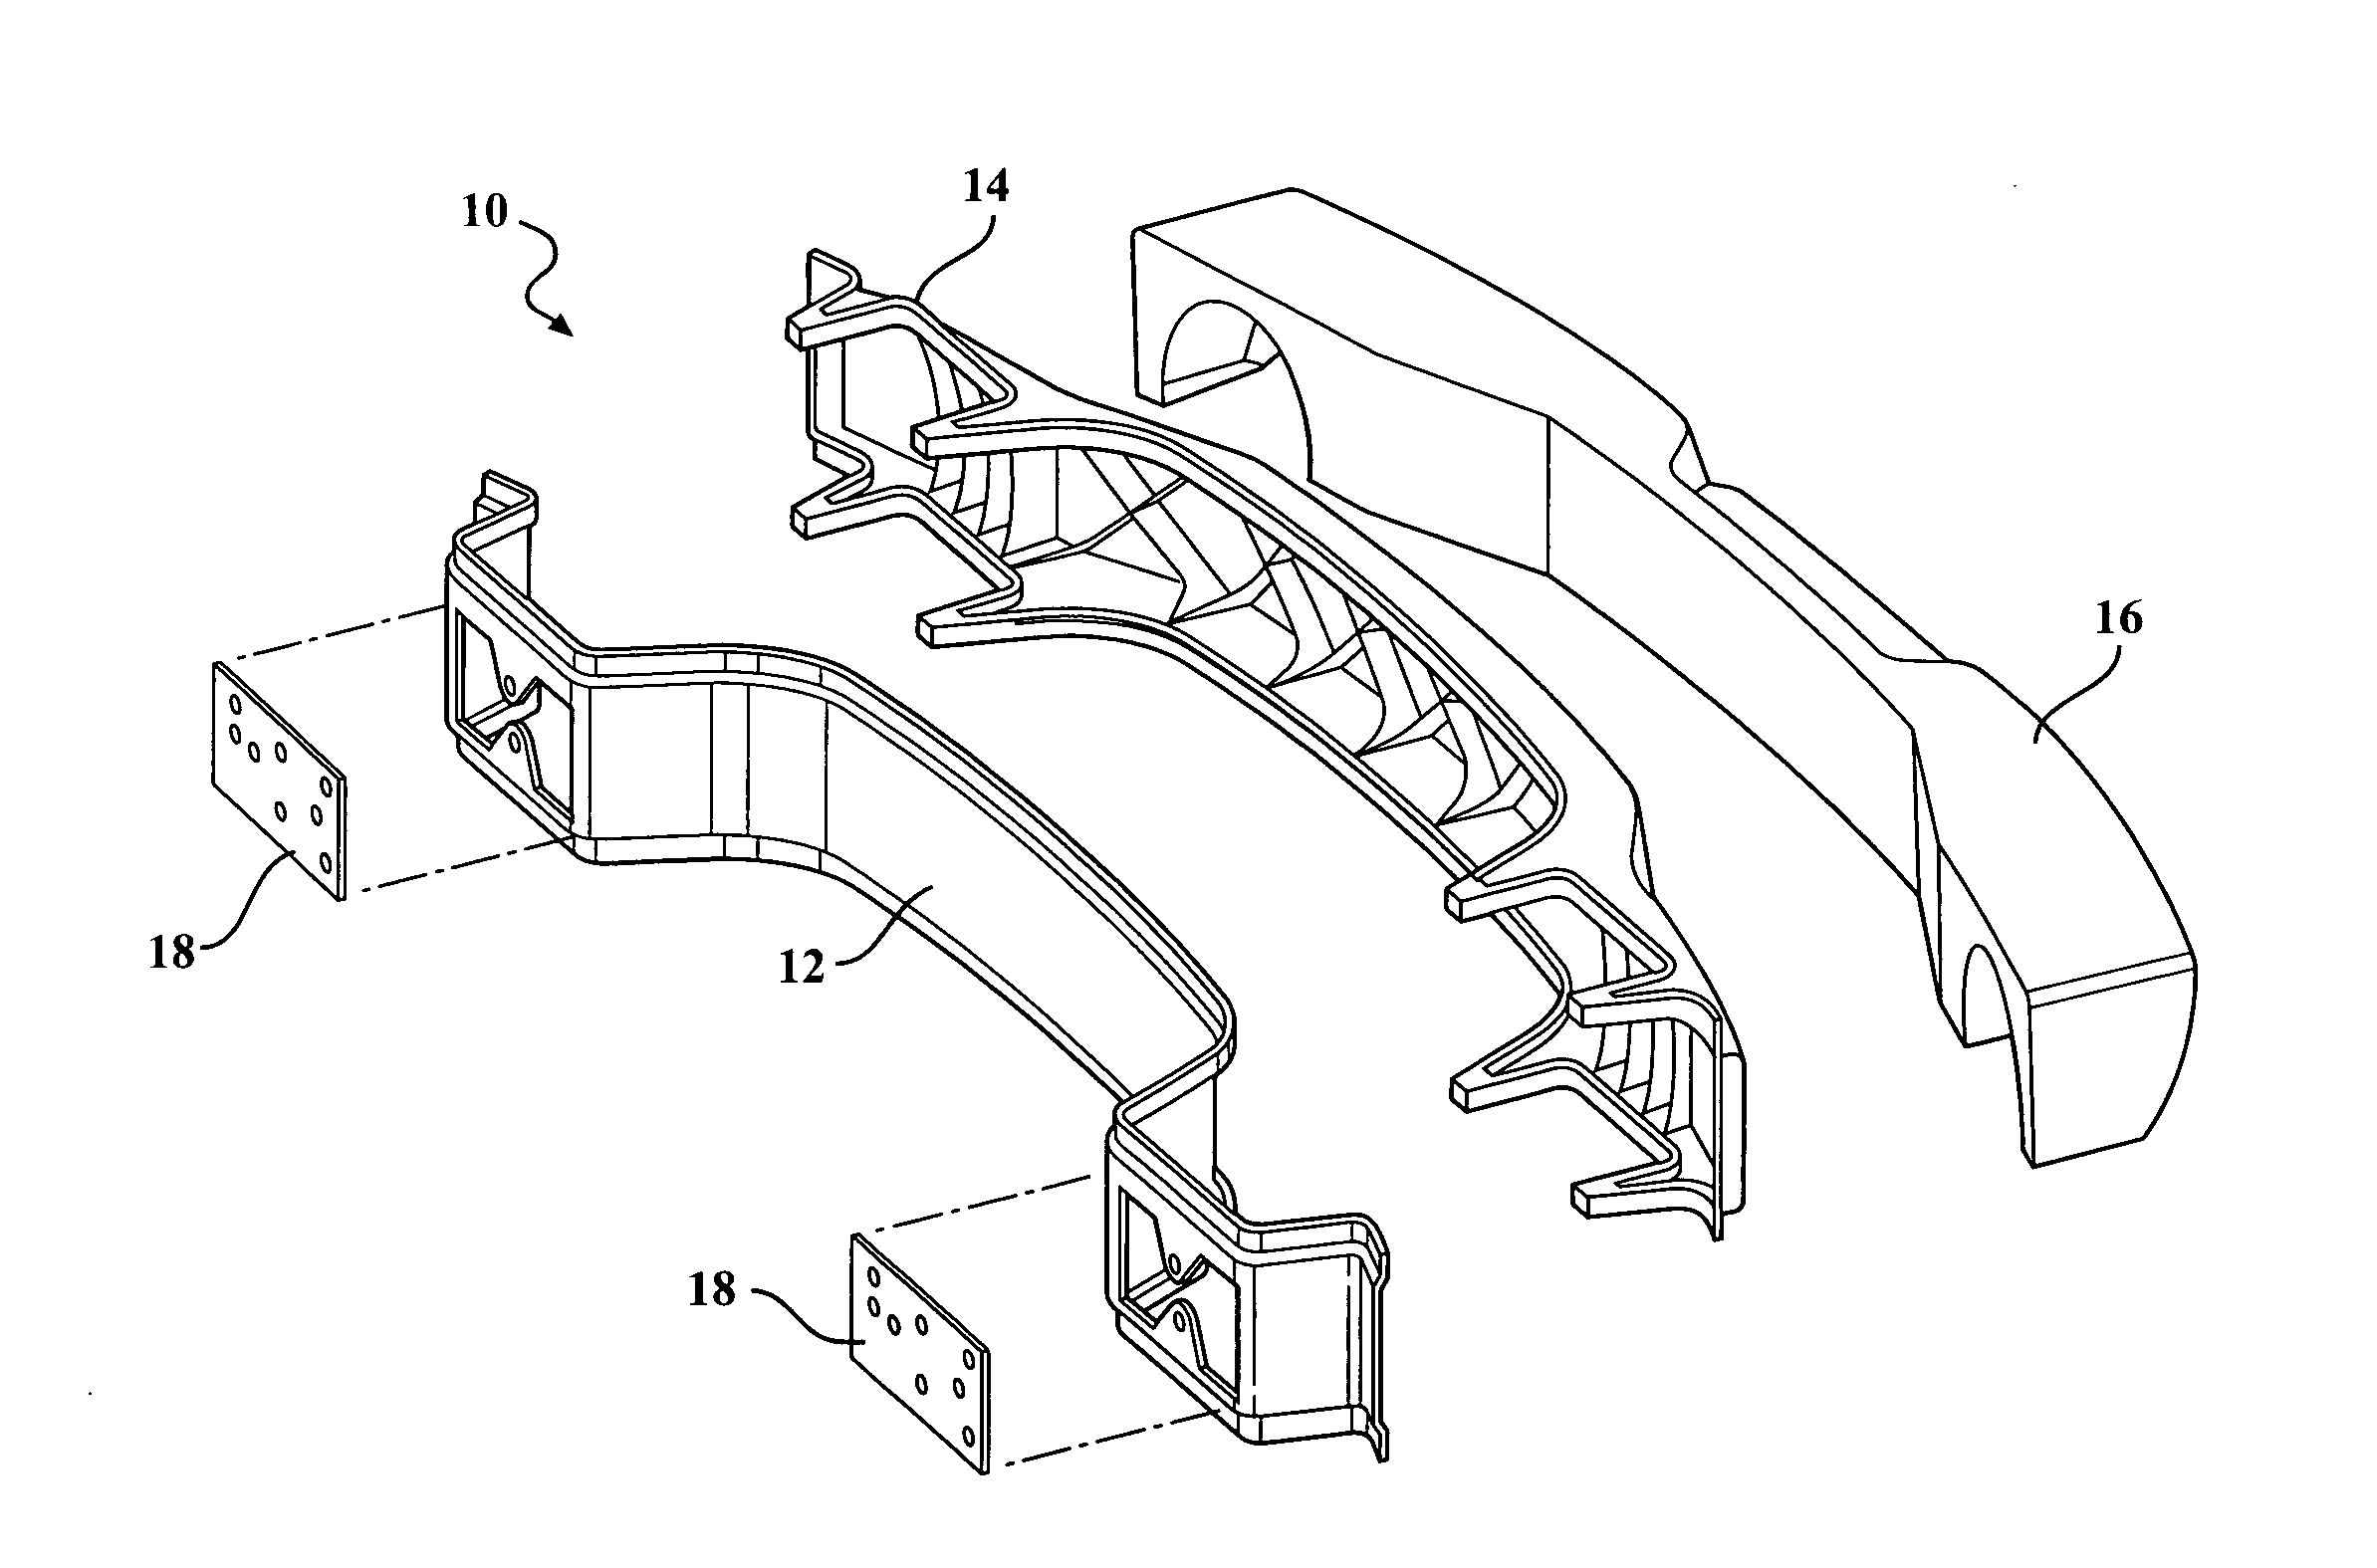 Bumper beam with integrated energy absorber